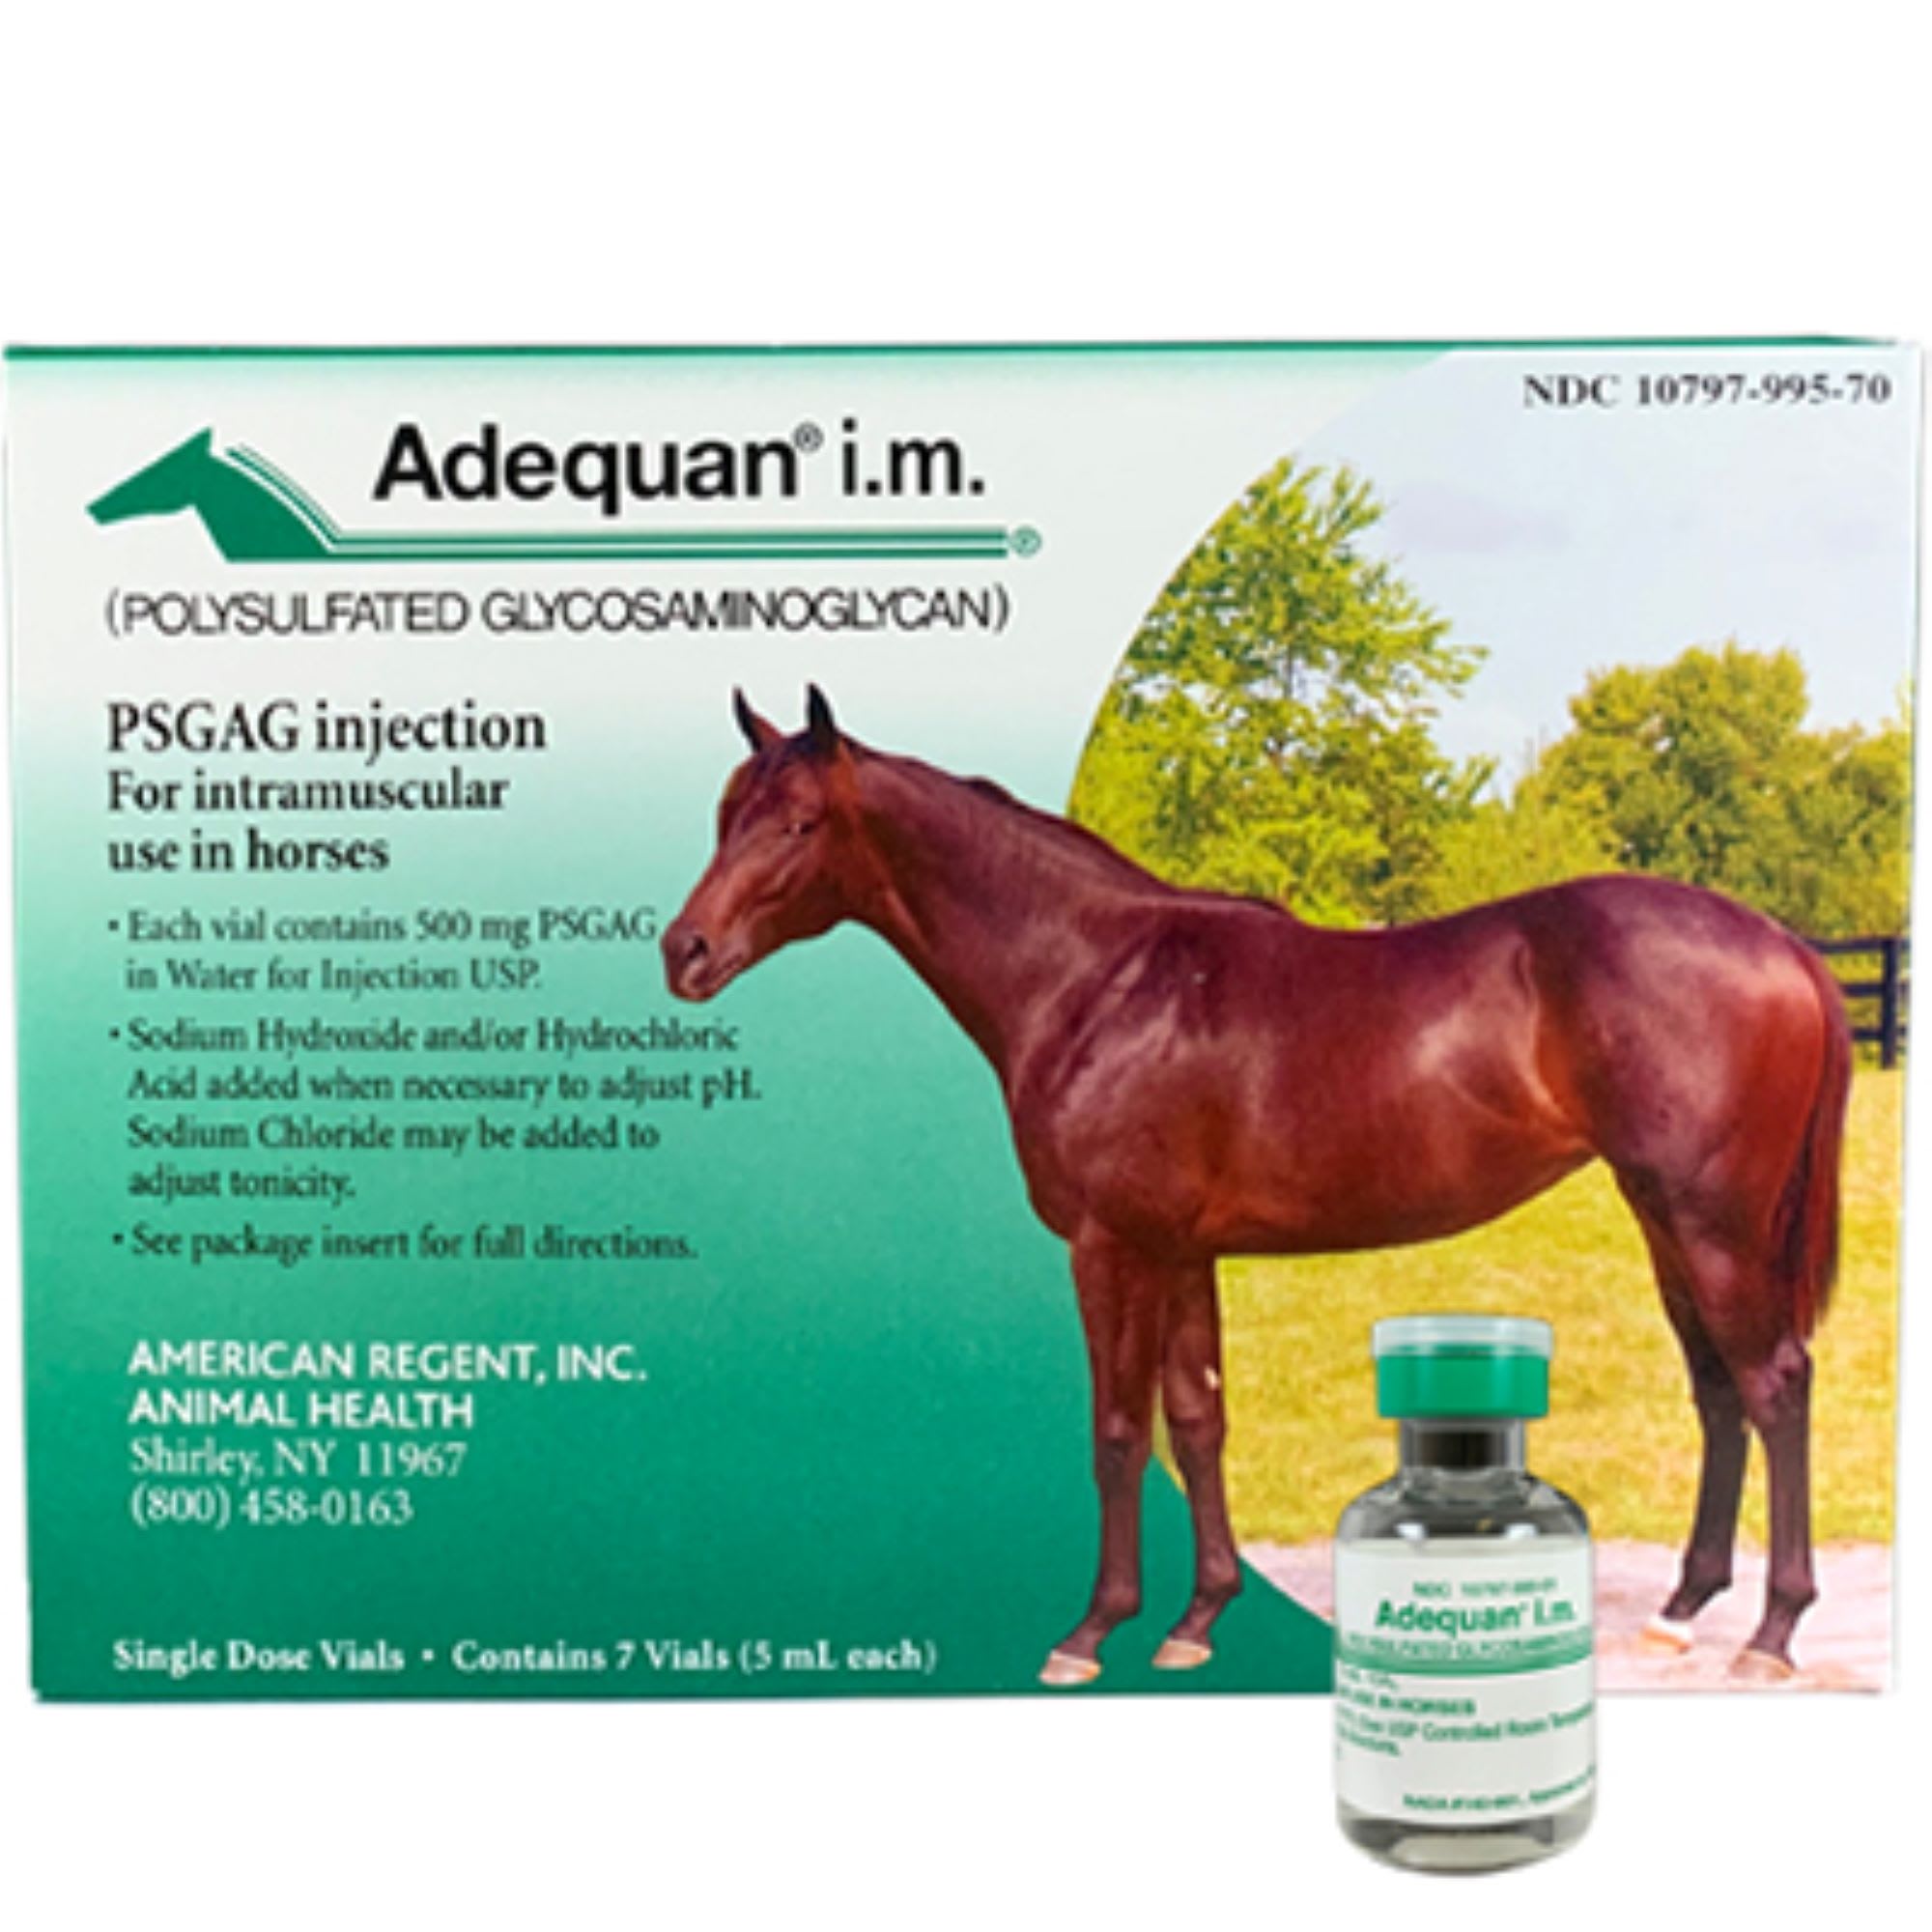 adequan-equine-5-ml-injectable-solution-for-horses-7-vials-petco